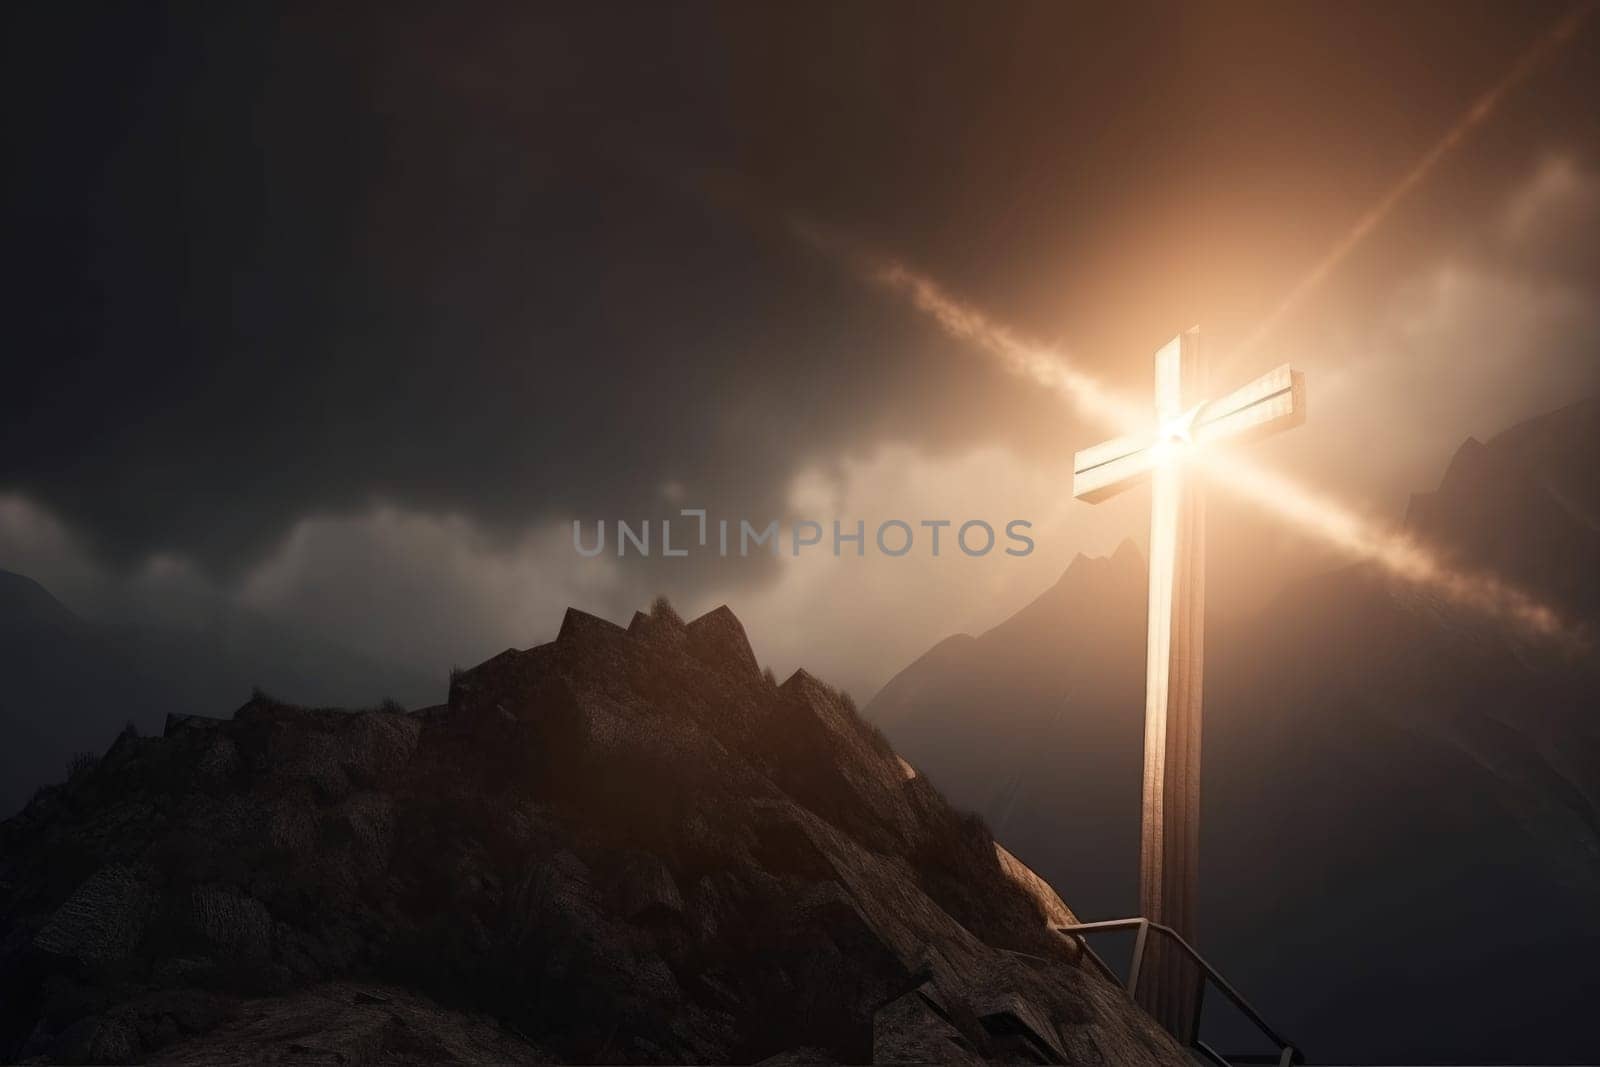 Mountain cross in sunlight reflection. Holy sky by ylivdesign